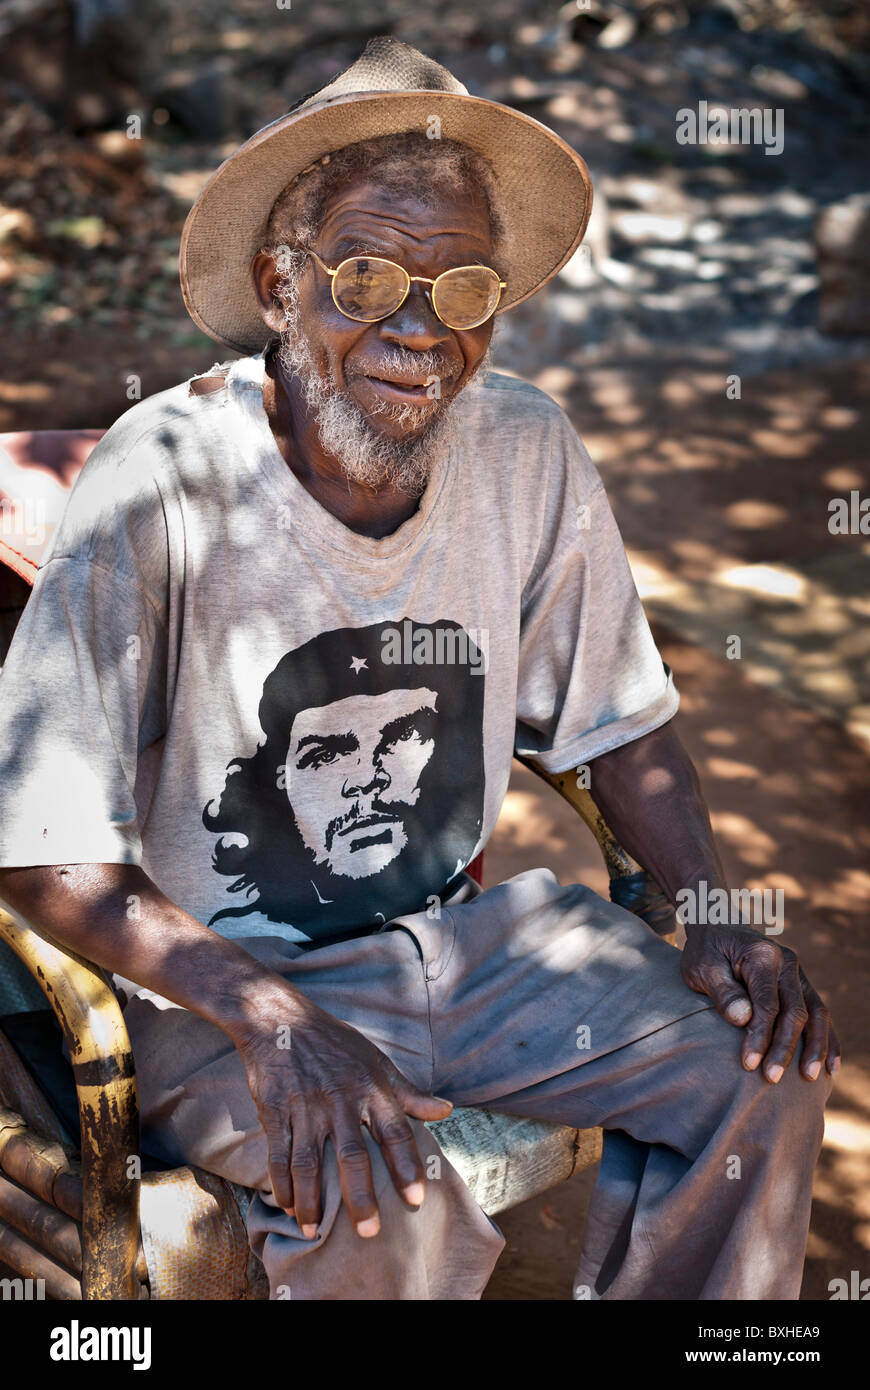 Old man with a Che Guevara T-Shirt, straw hat and glasses looking to the camera, Chinotimba, Zimbabwe, Africa. Stock Photo